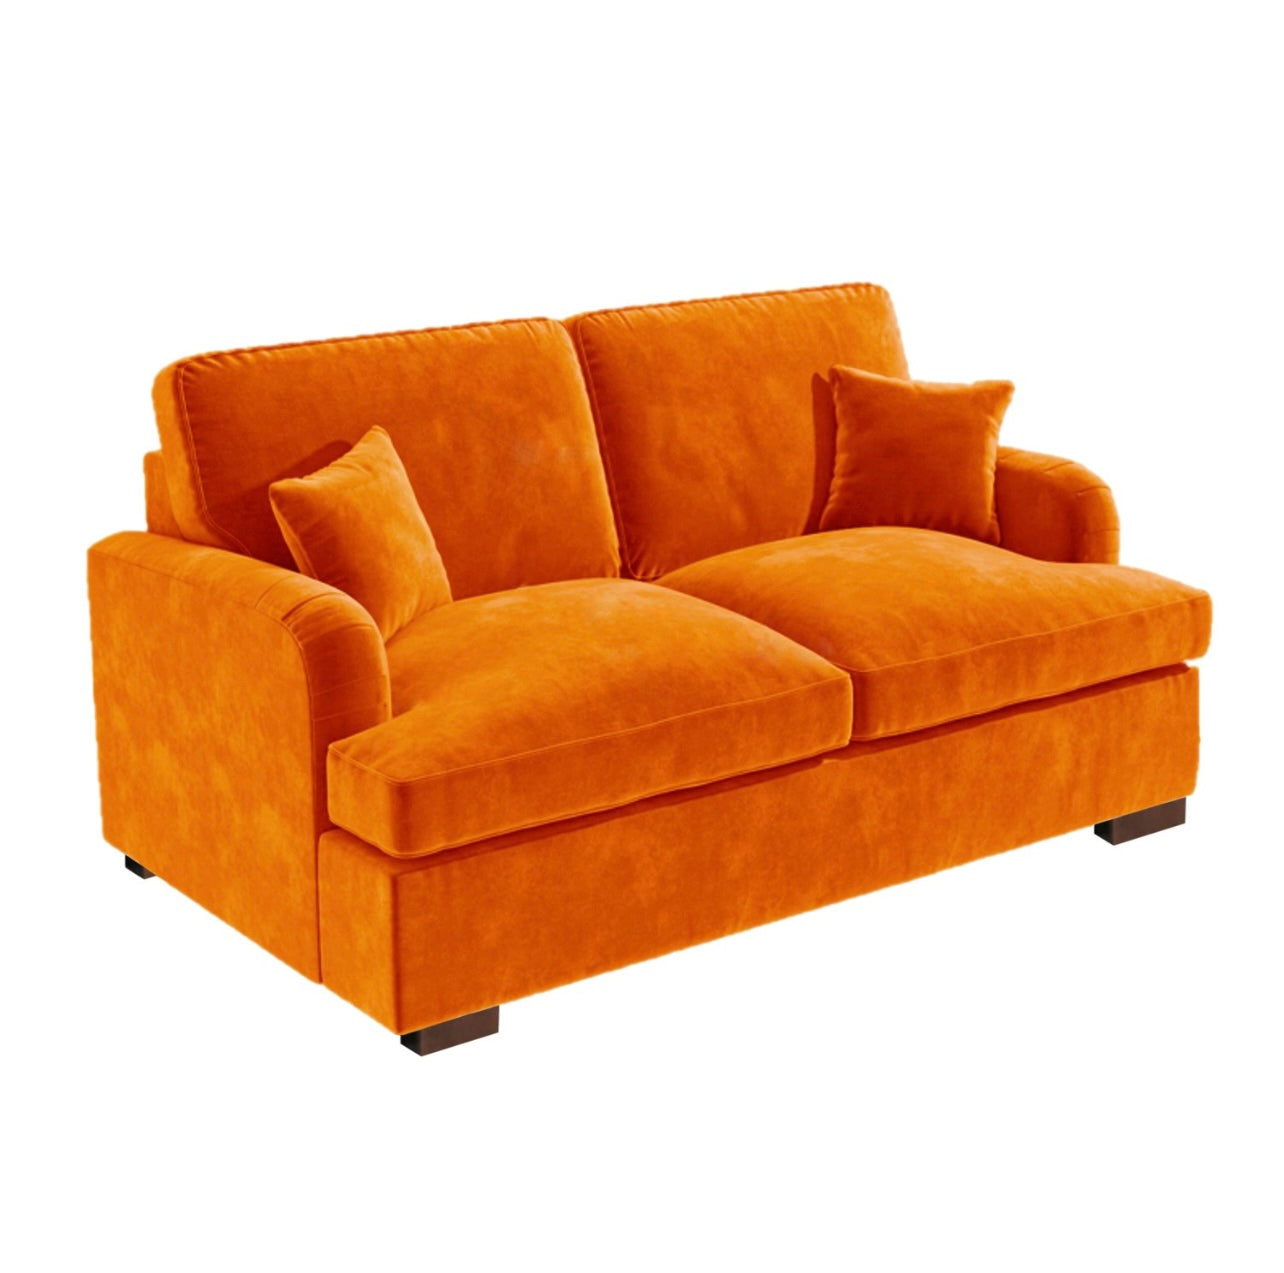 Orange Sofa Bed 2 Seater in Velvet with Cushions